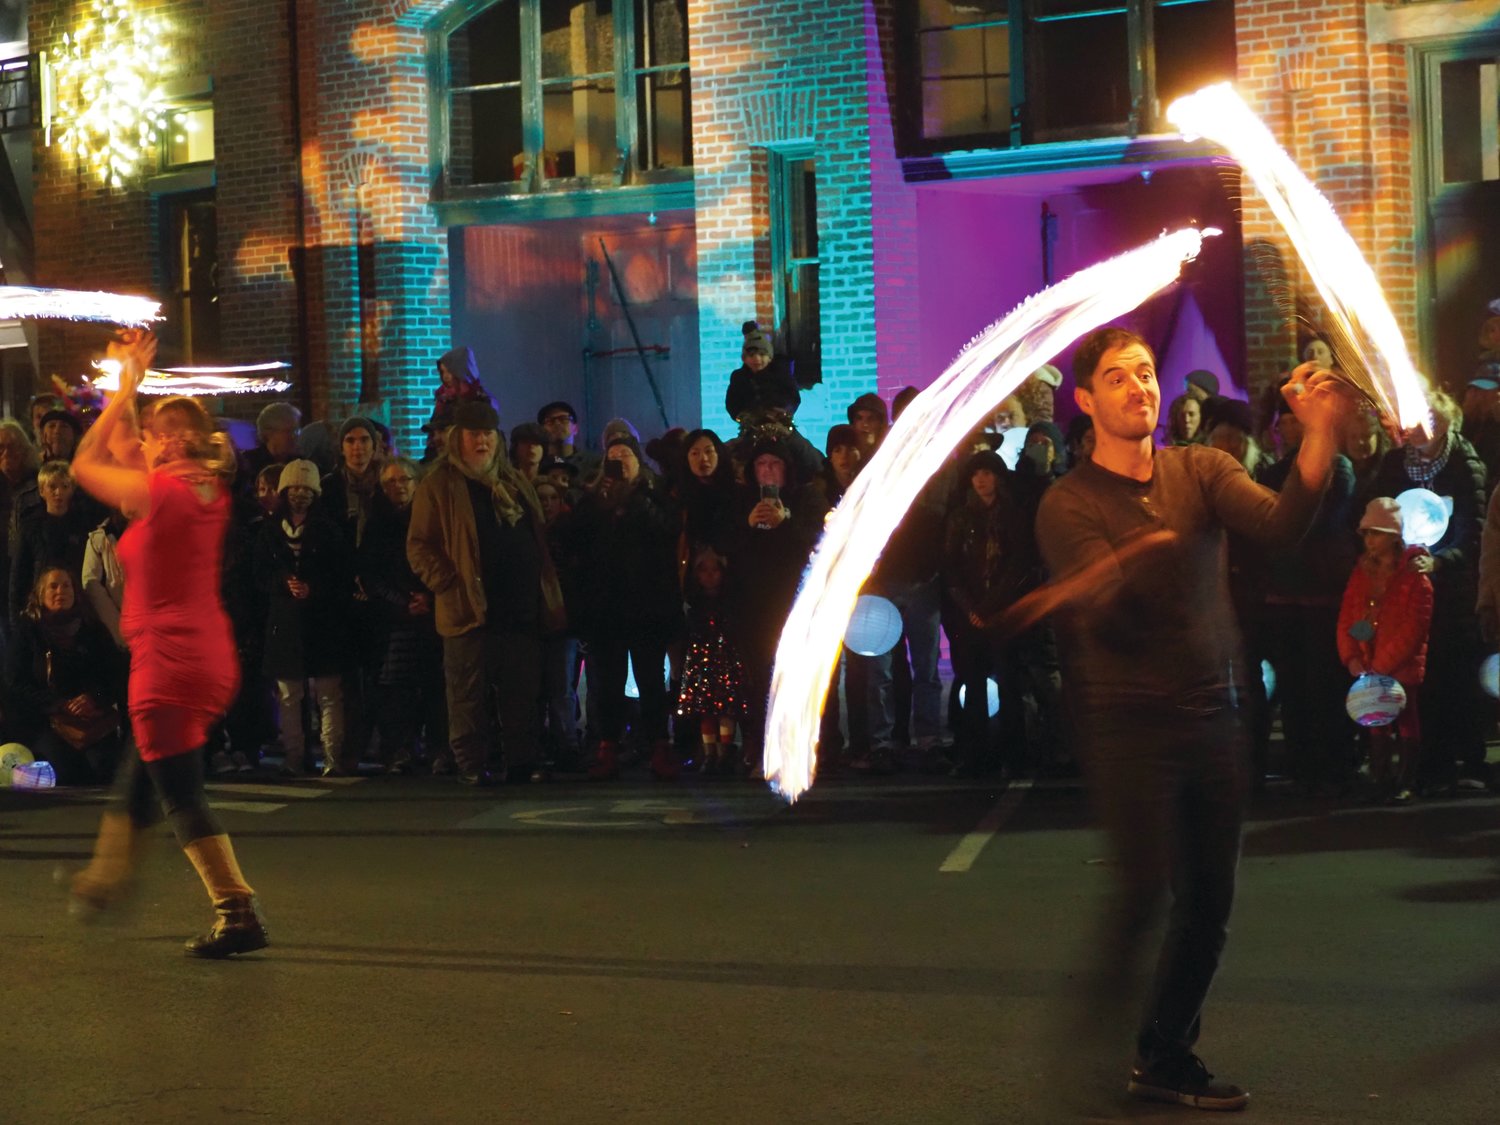 Dancers from the Feral Fire Flow Collective helped heat up the night with their blazing performances.